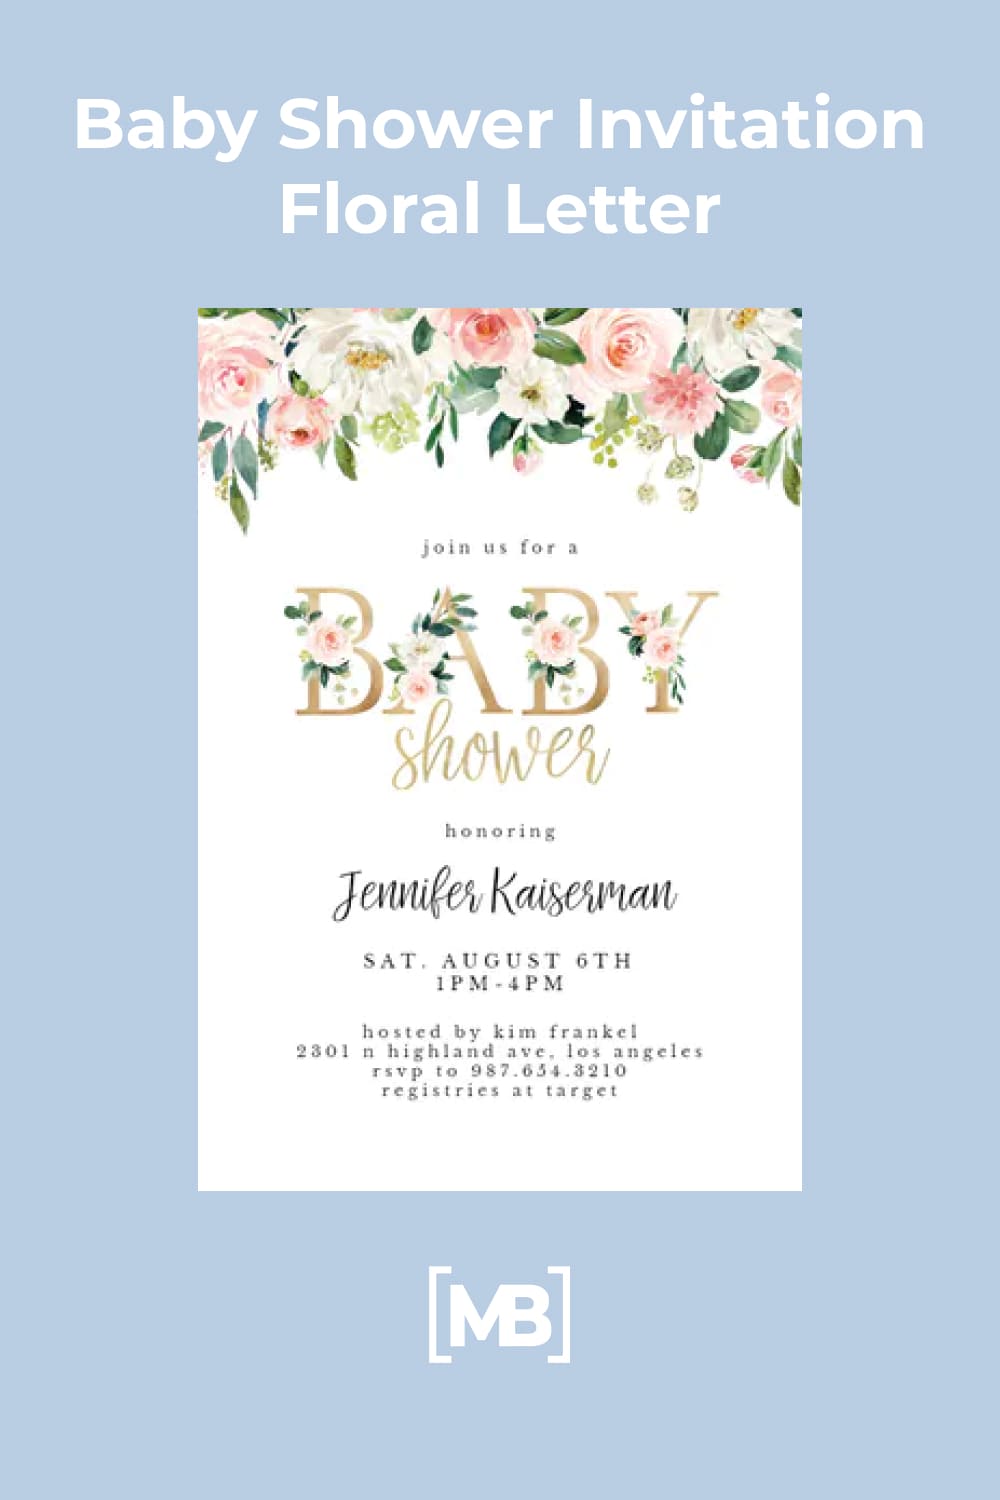 Romantic and gentle invitation with flowers.